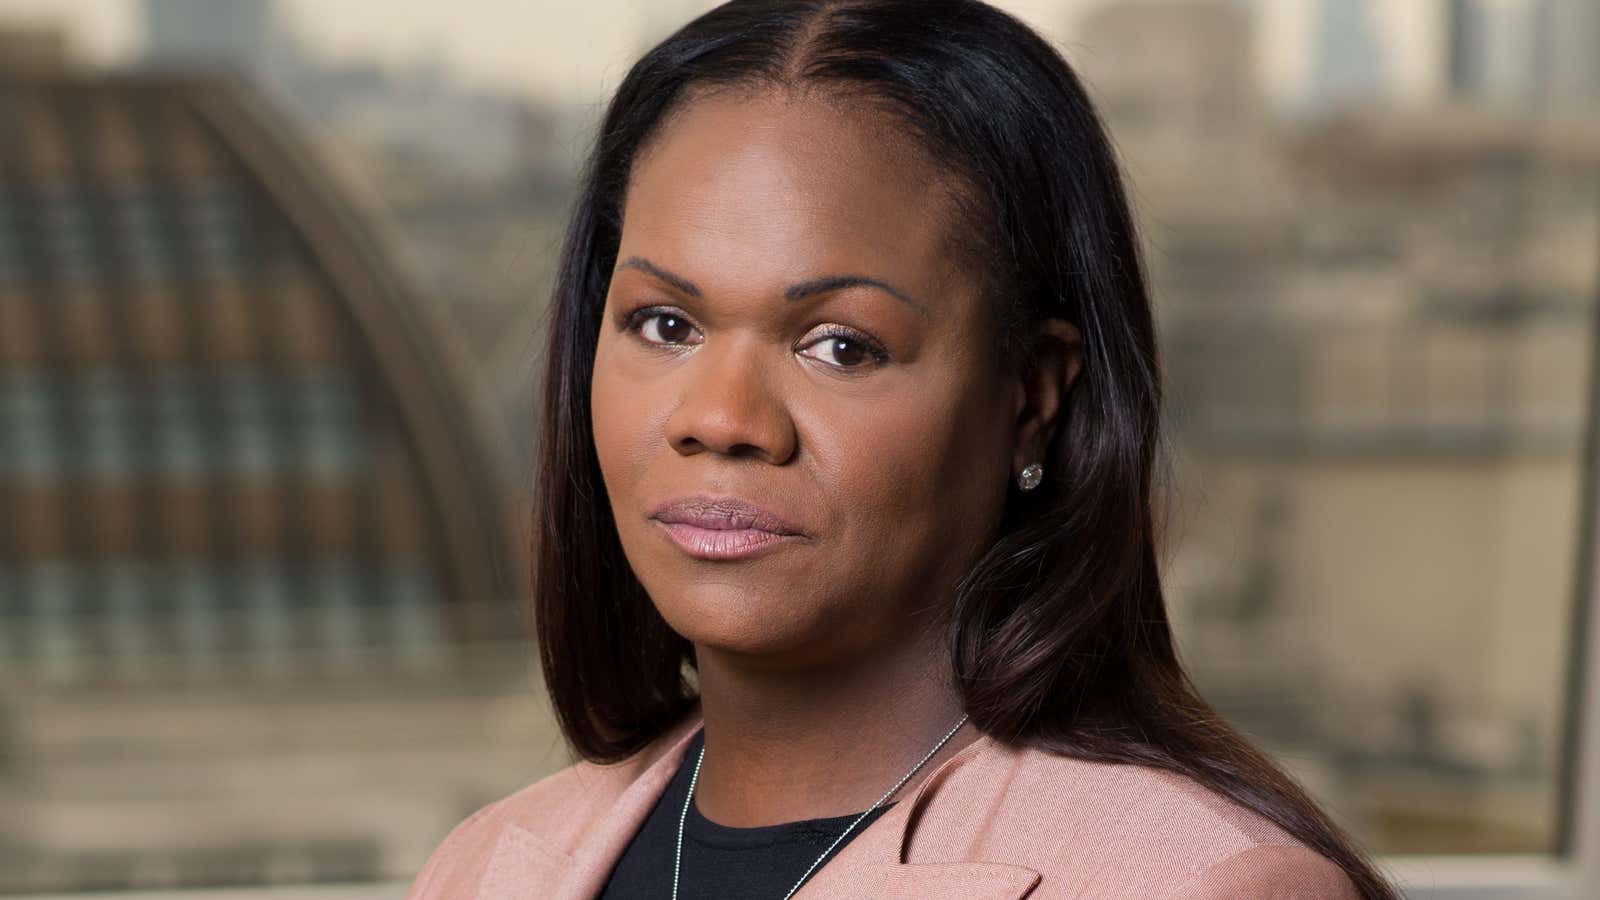 Vivian Hunt is said to be a top contender to lead McKinsey.